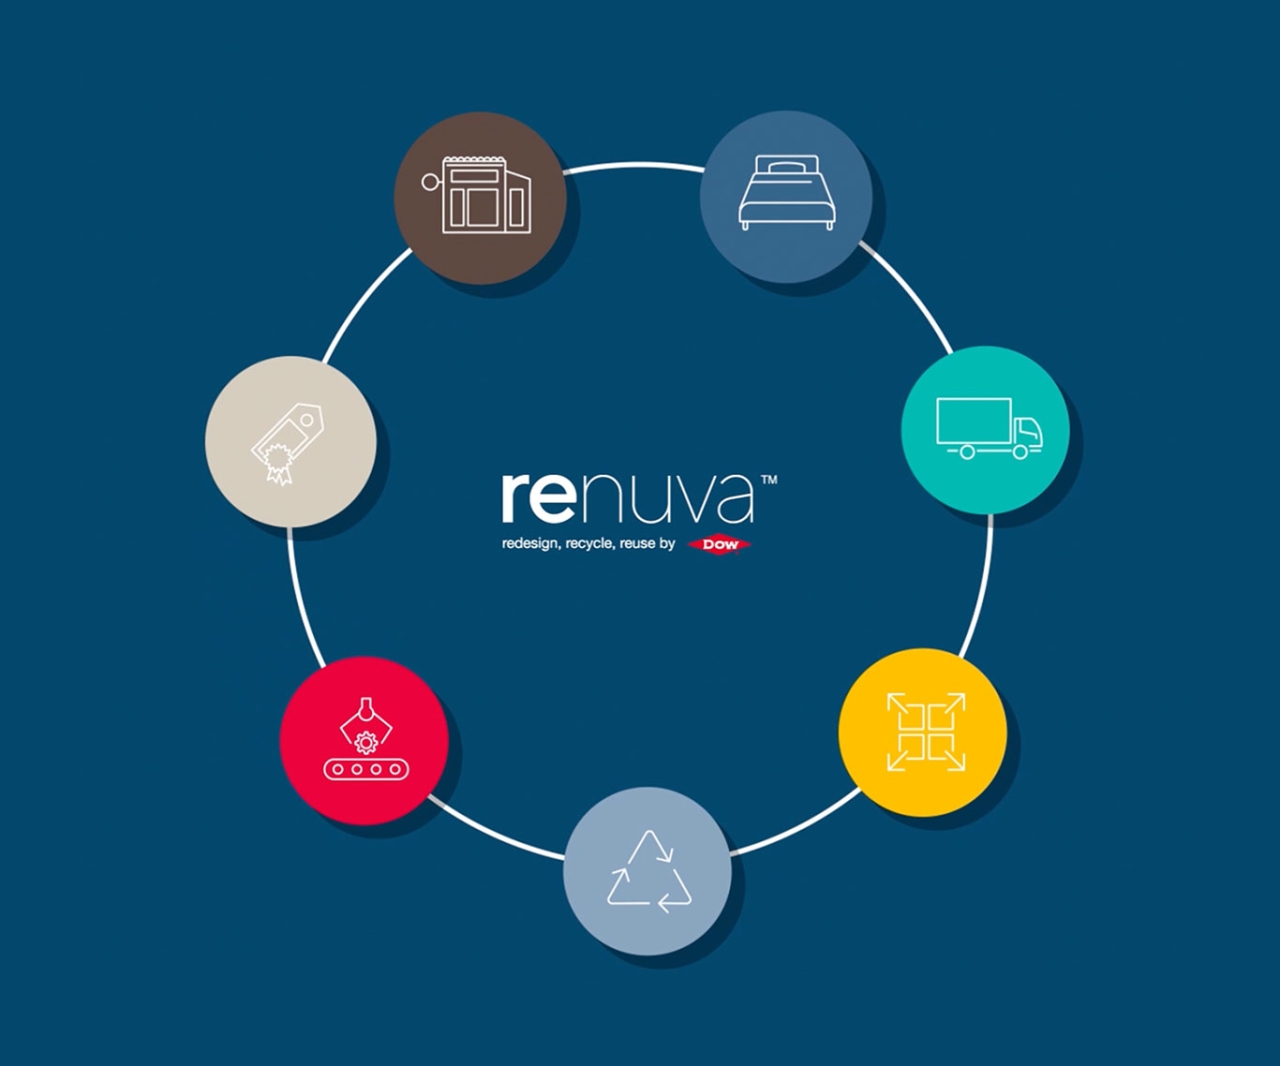 info graphic with renuva logo at the center. Different symbols in a circle around it pertaining to the steps to recycling a mattress